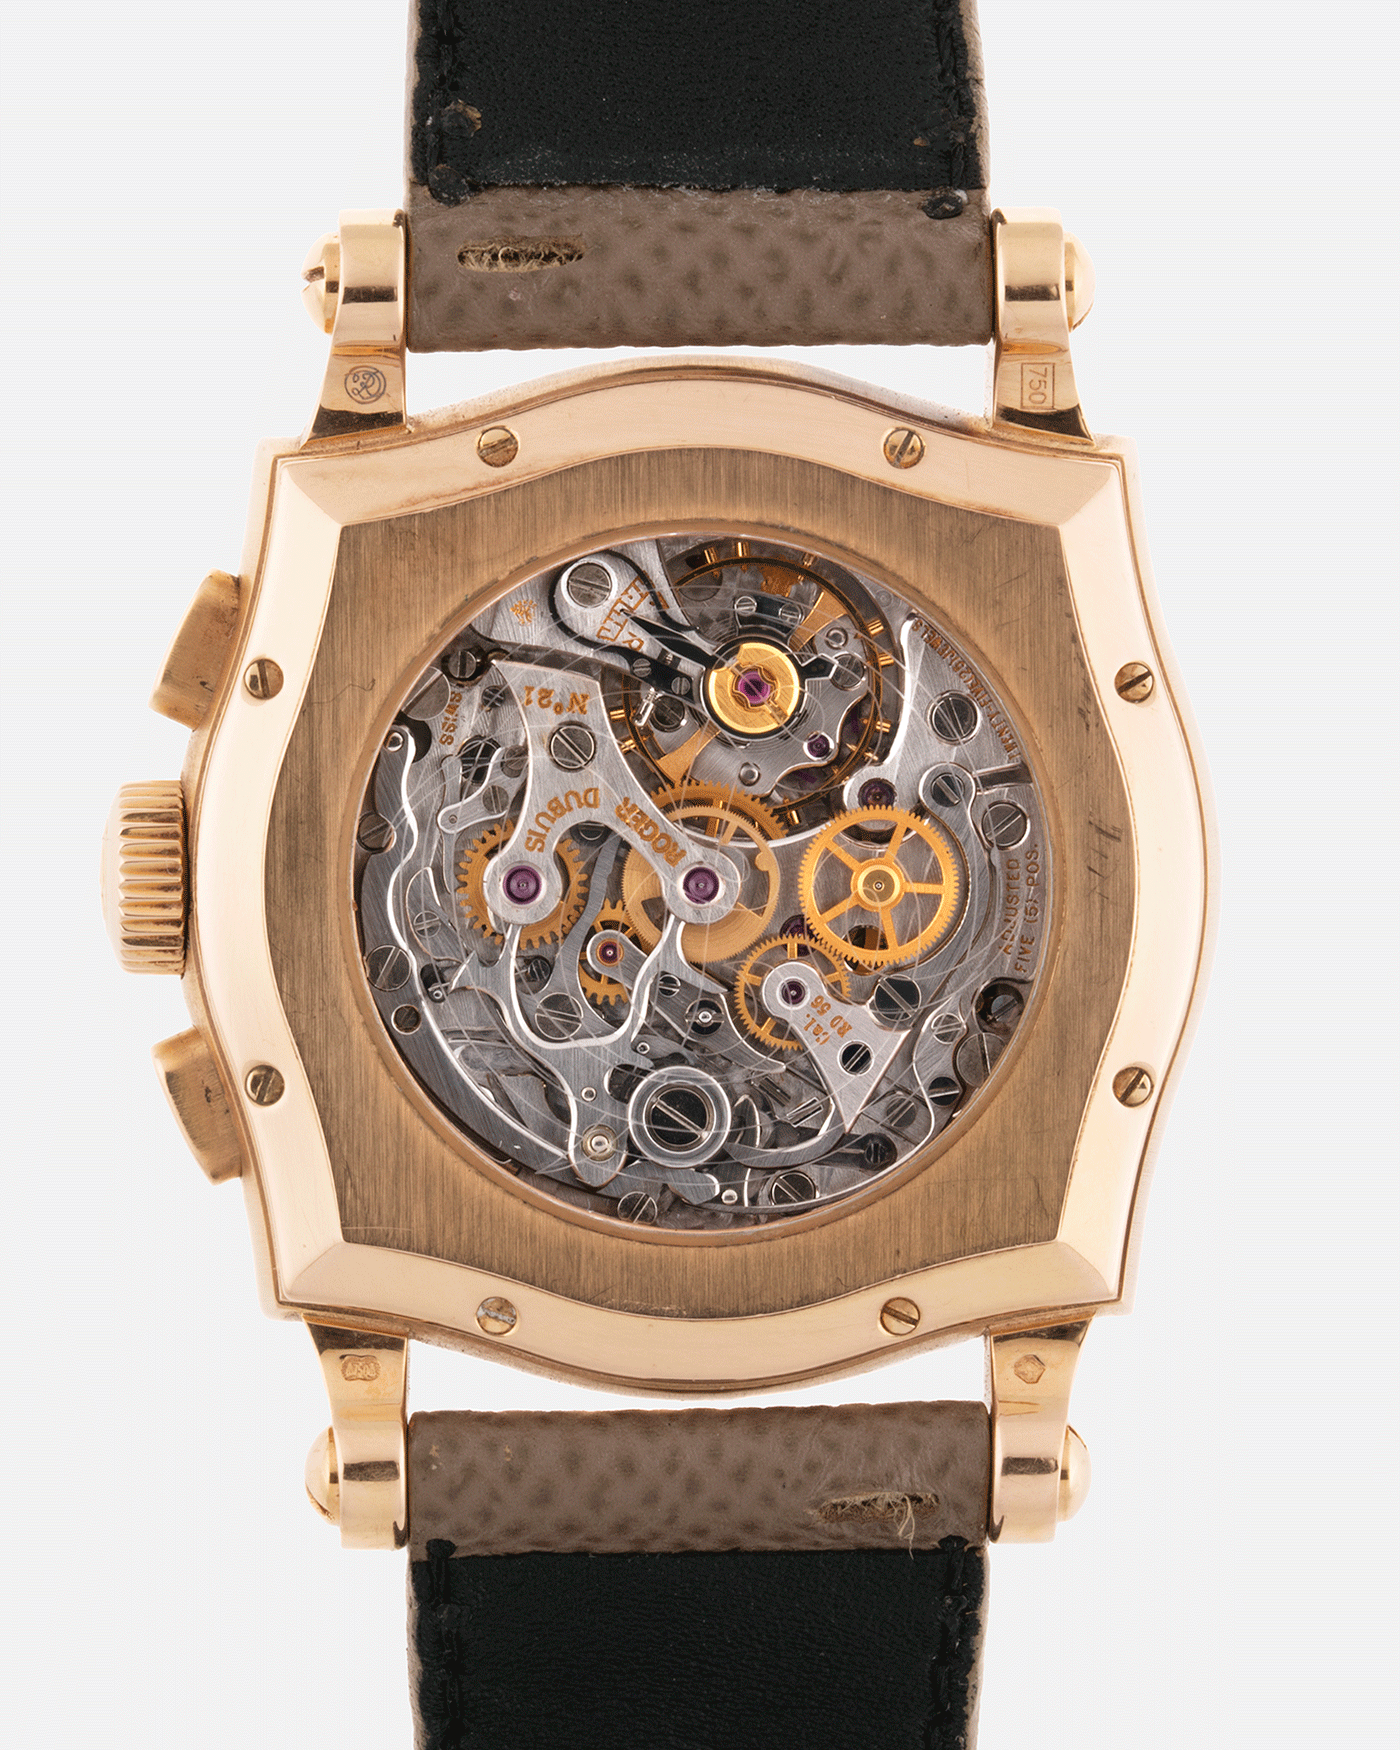 Roger Dubuis Sympathie 40 Biretrograde Chronograph Watch | S.Song Timepieces 